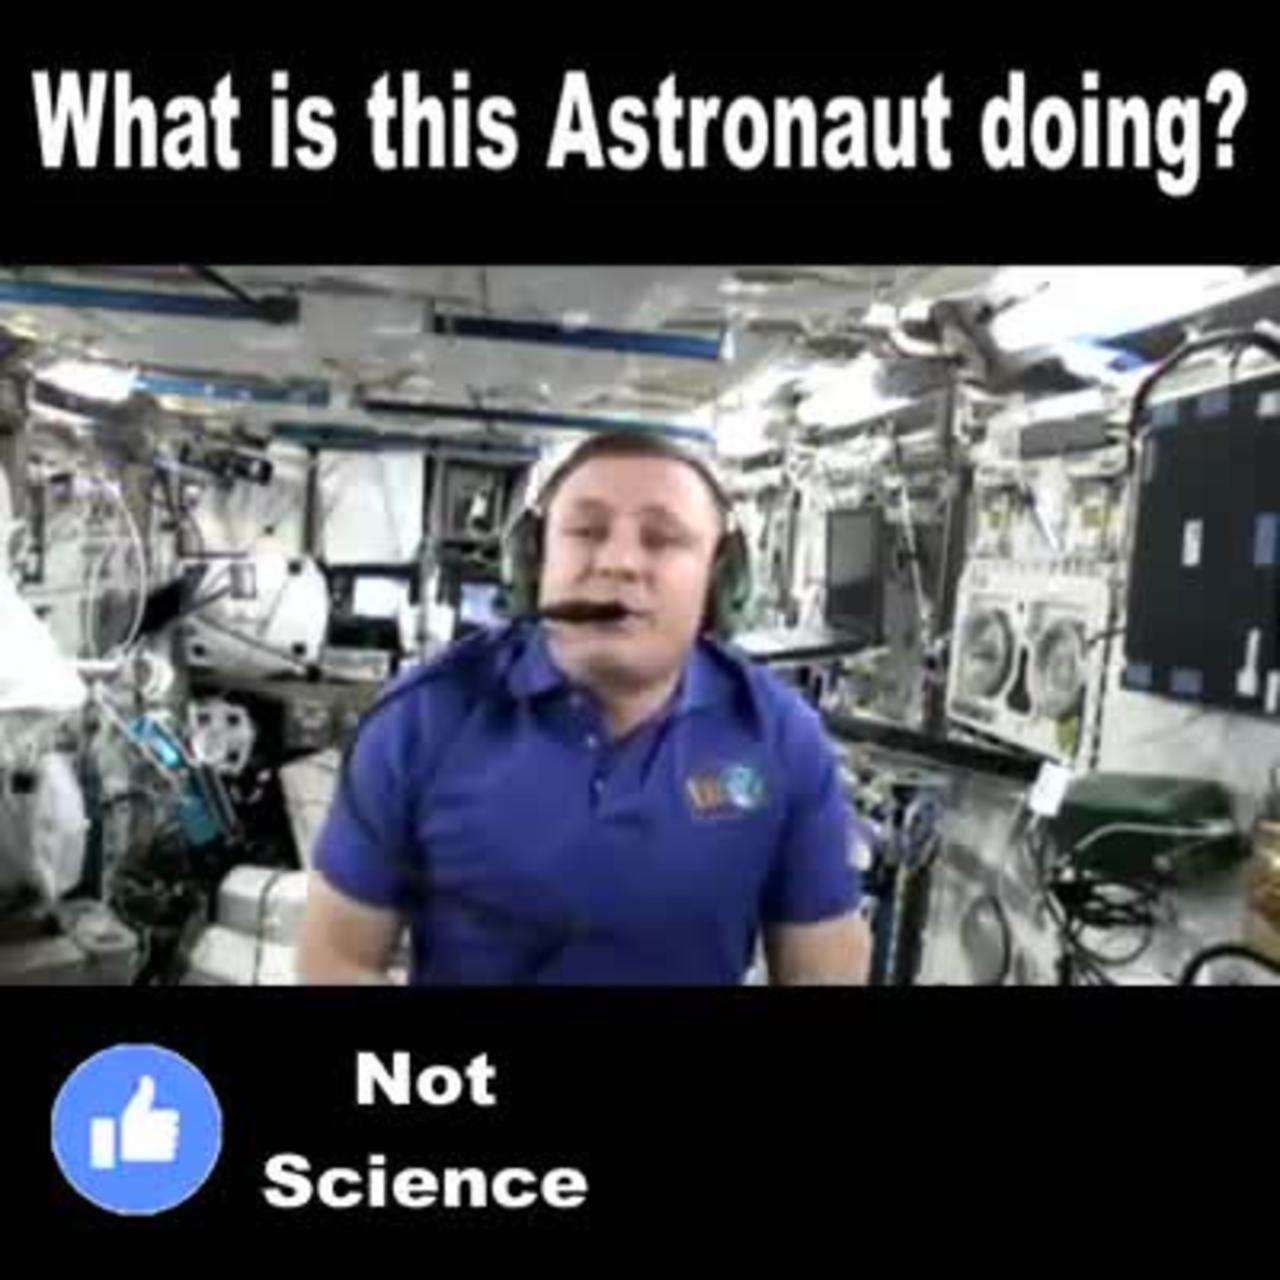 WTF is this AstroNot Doing?